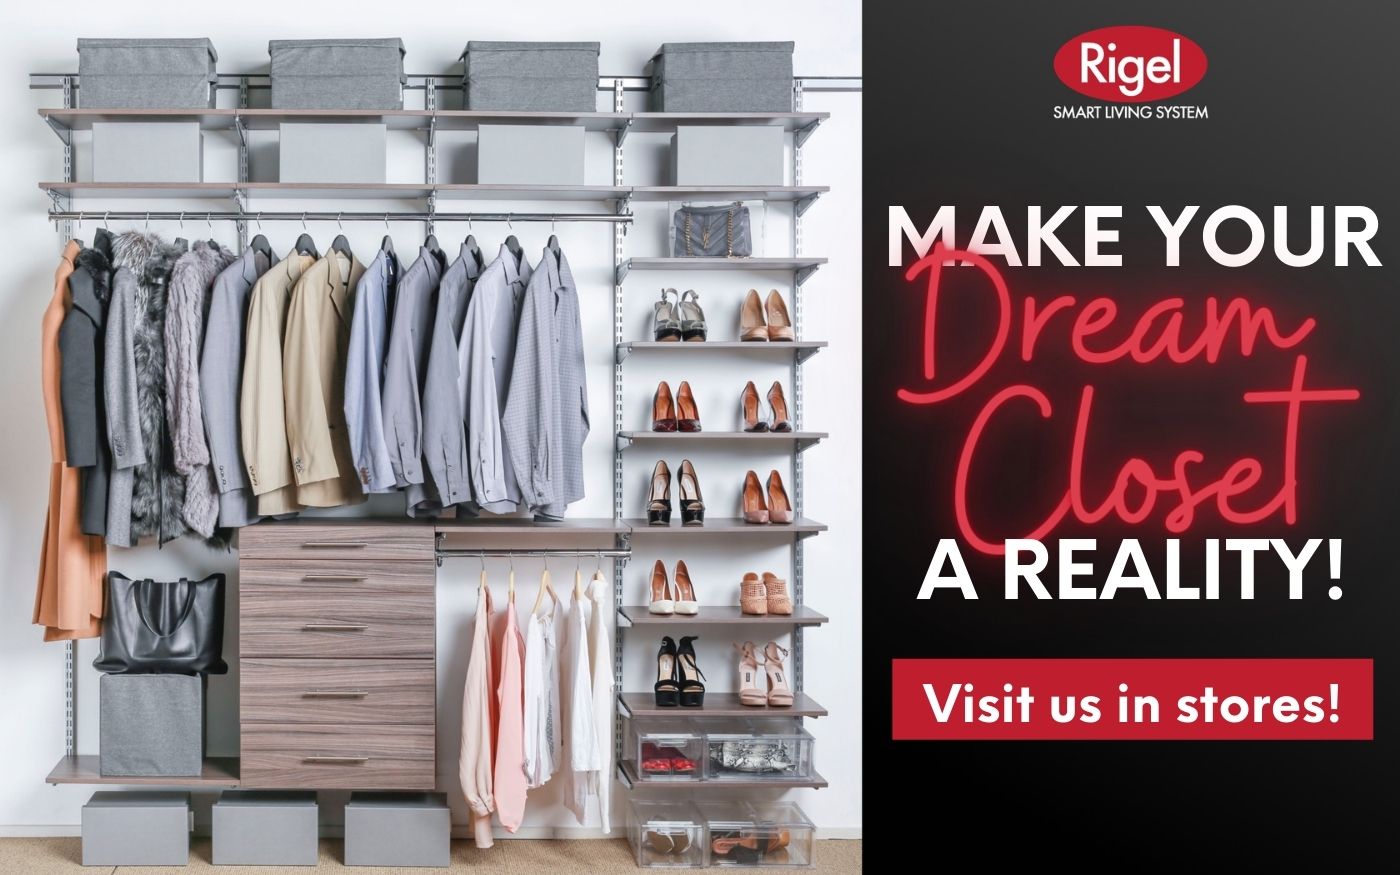 Make your dream closet a reality! Visit us in stores now!